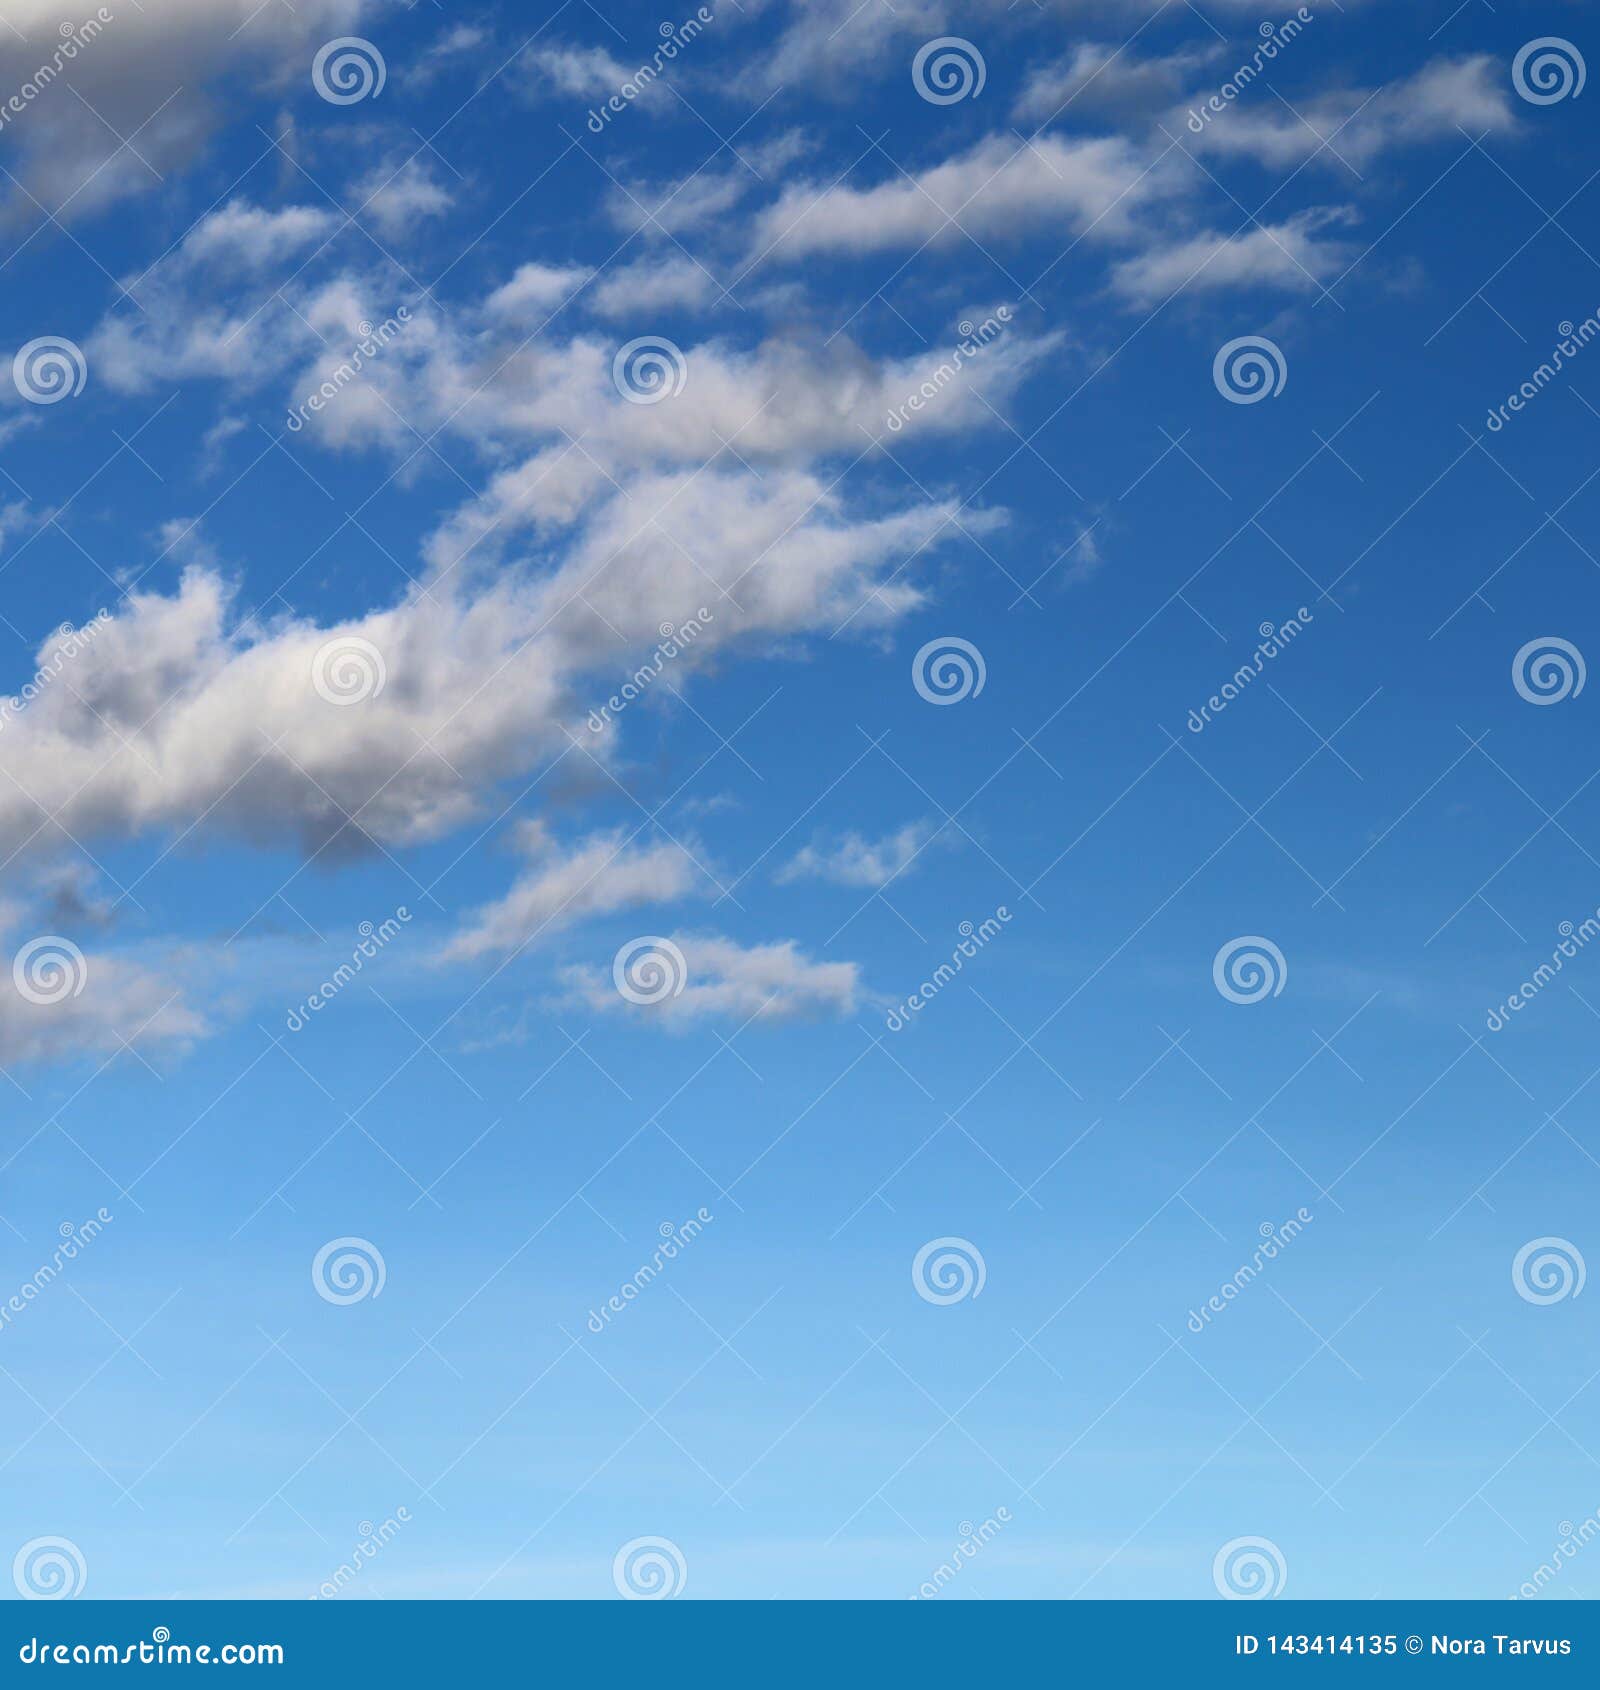 Cotton Clouds Stock Photos, Images and Backgrounds for Free Download